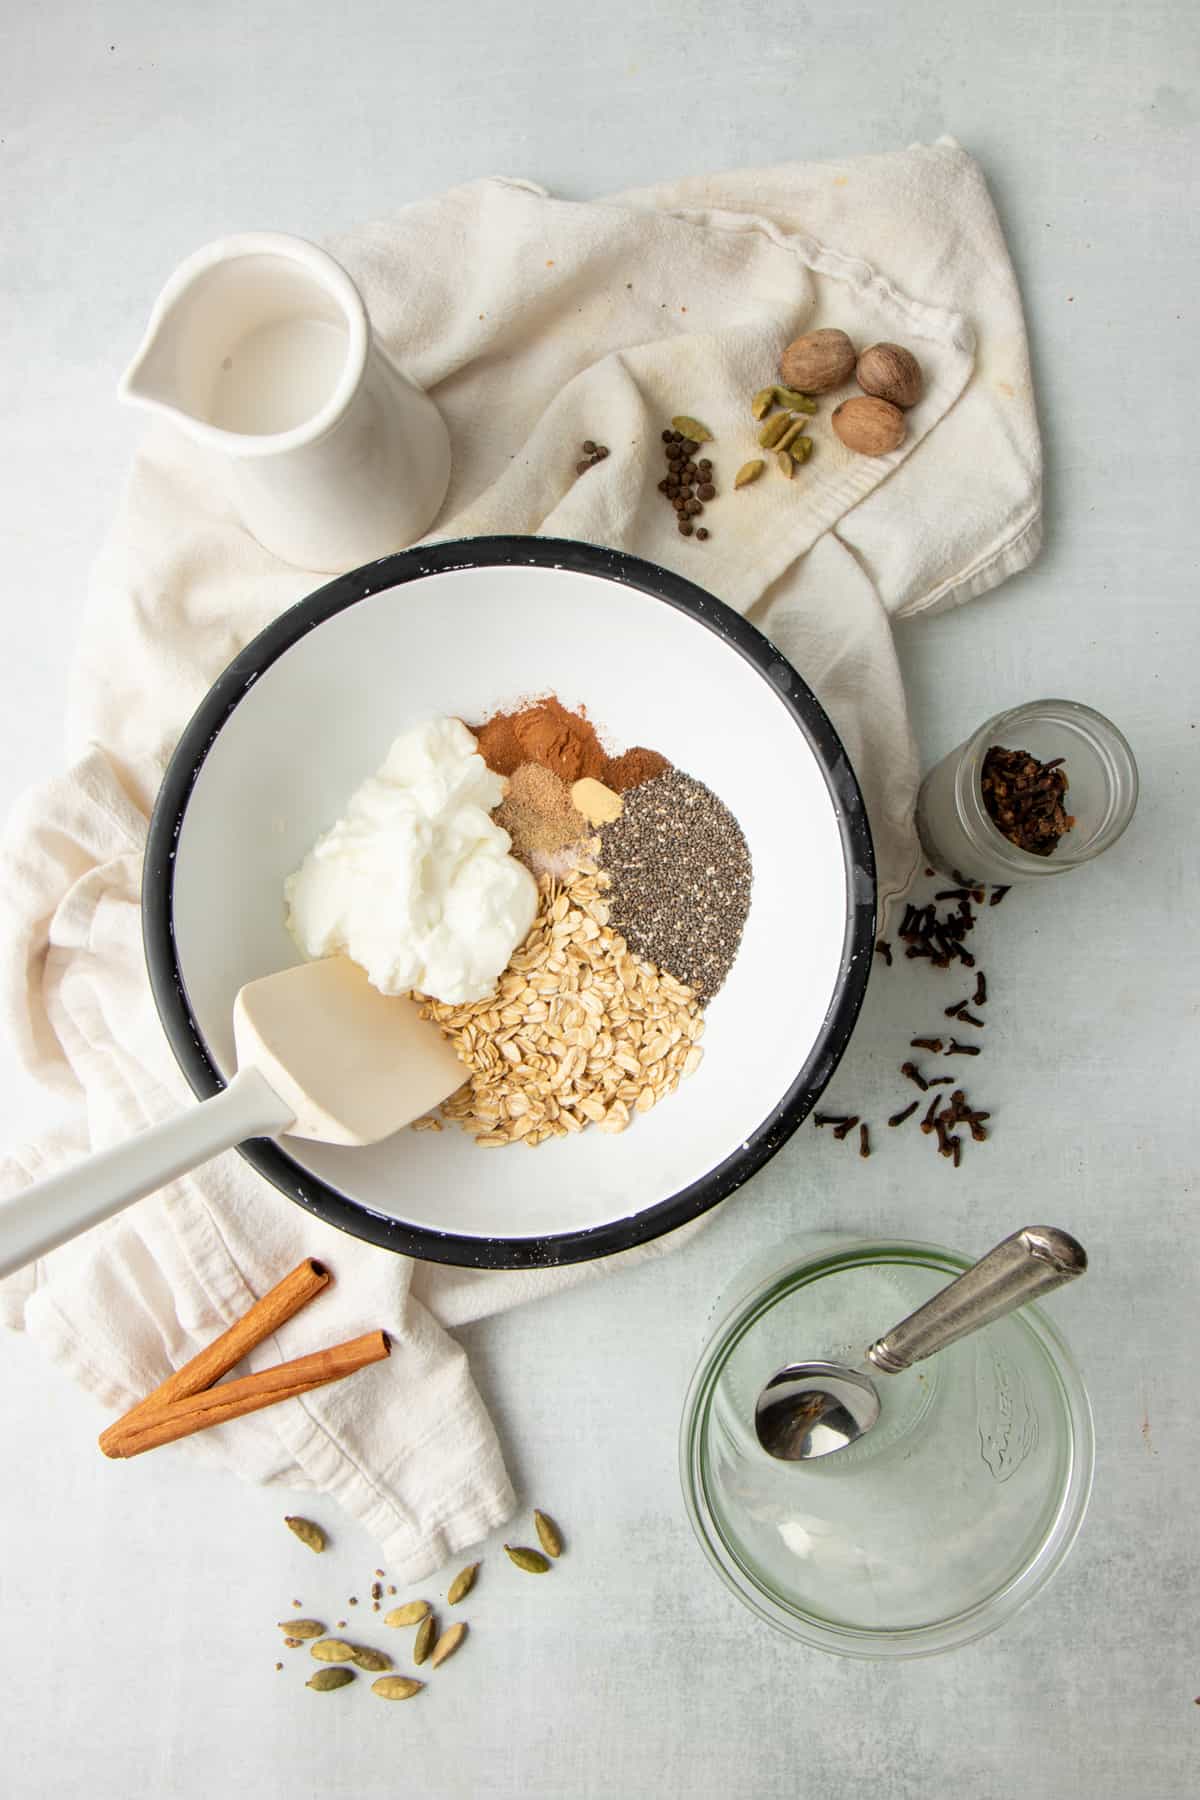 A white rubber spatula sits in a white mixing bowl full of oatmeal, chia seeds, Greek yogurt, and other ingredients.